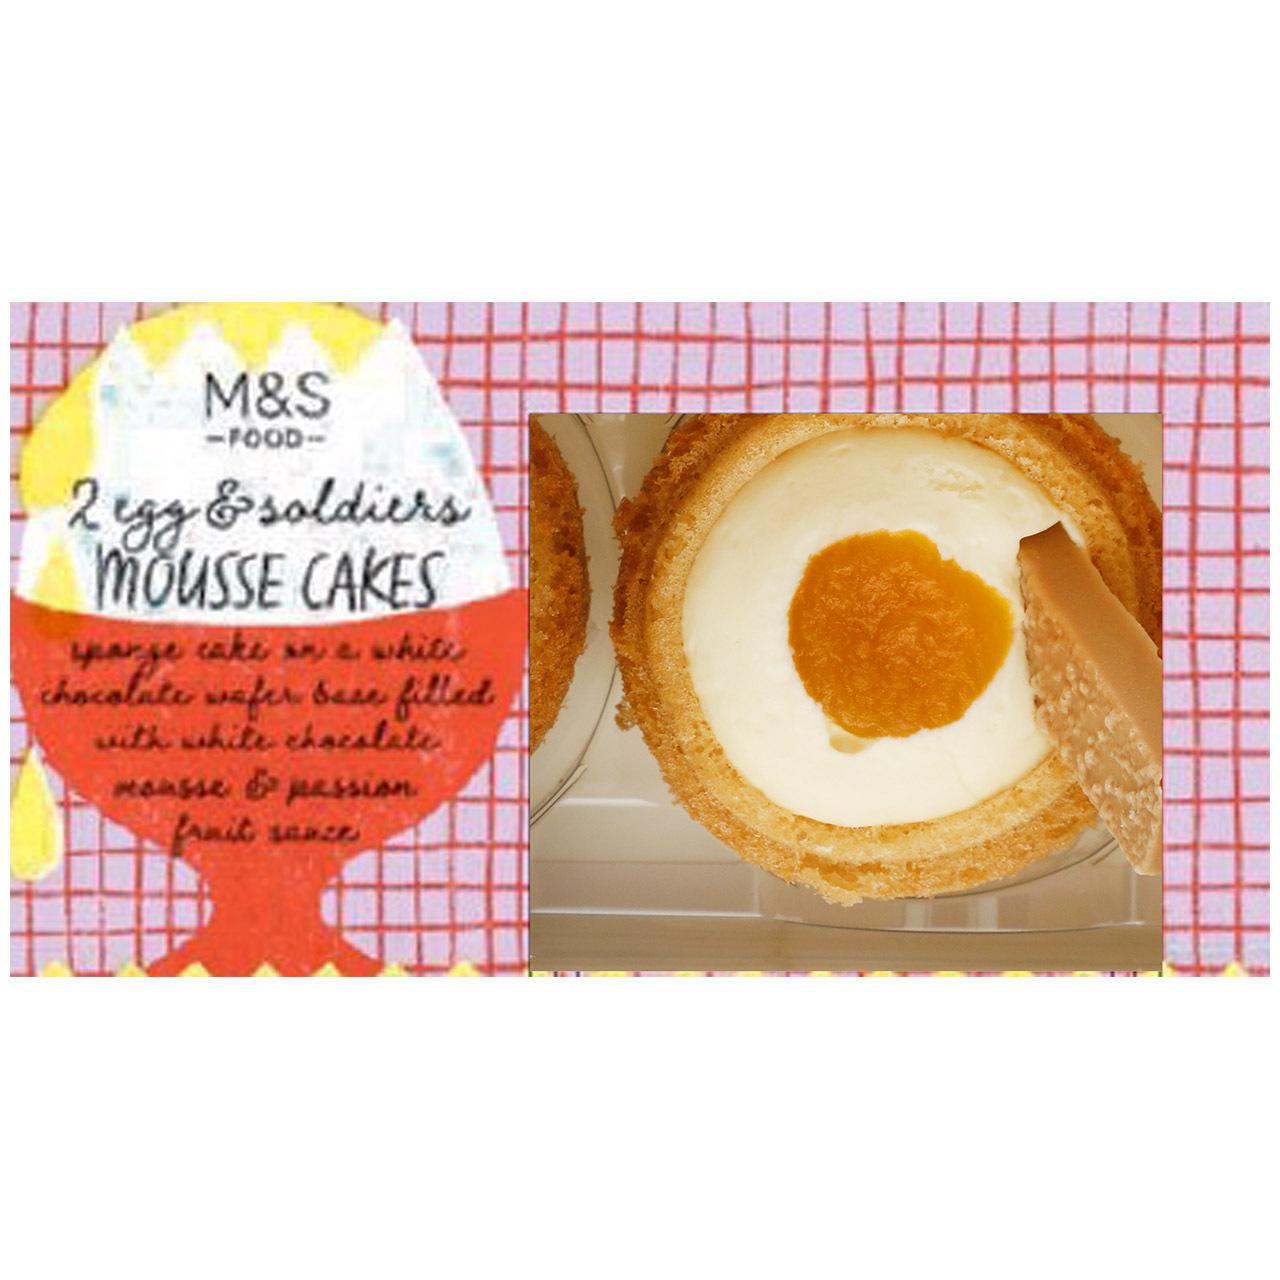 M&S 2 Egg & Soldiers Mousse Cakes 140g